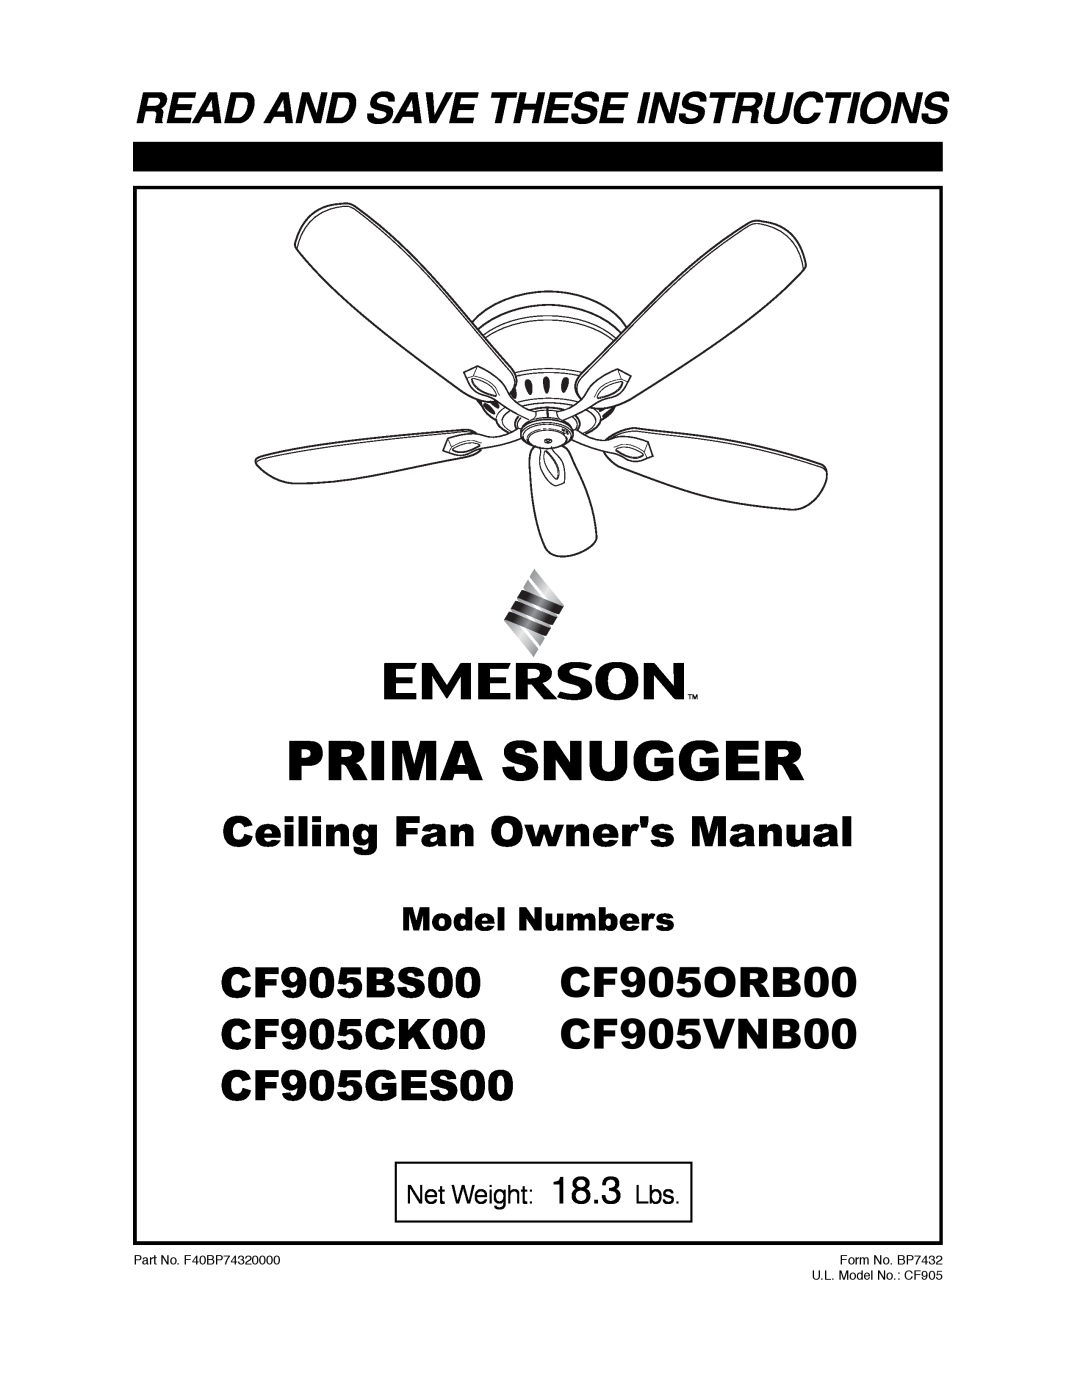 Emerson CF905BS00 owner manual Prima Snugger, Read And Save These Instructions, Model Numbers, Net Weight 18.3 Lbs 